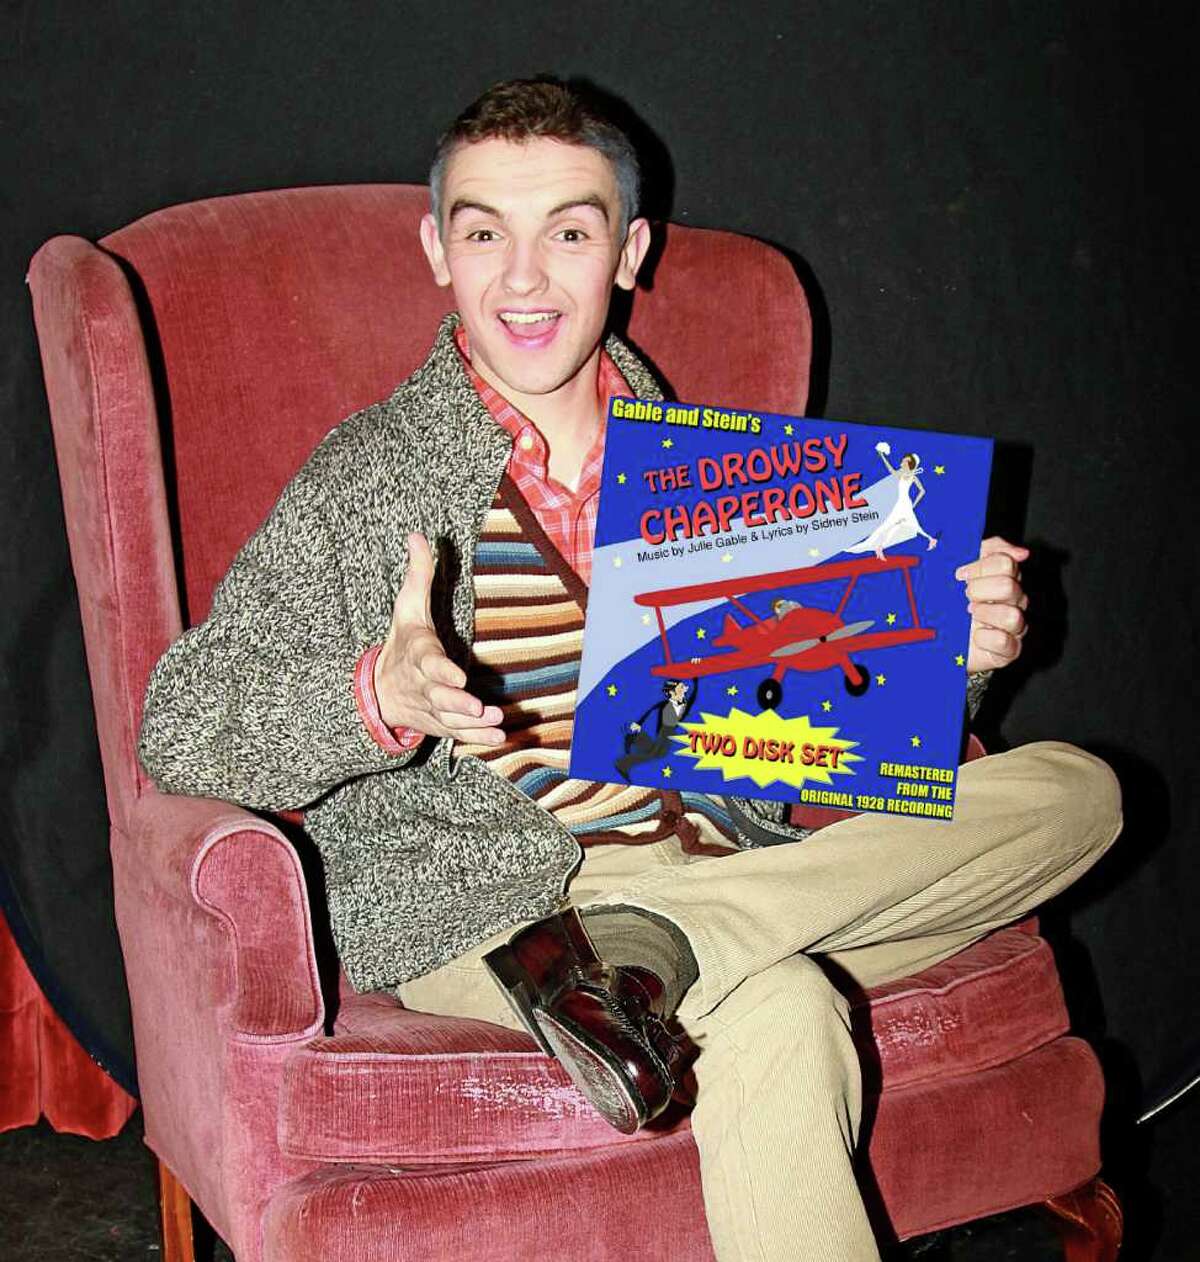 High School senior Matt Maguire plays the “man in the chair:” a devoted musical theater fan who’s dreary world is drastically changed by the simple act of putting on an old LP.